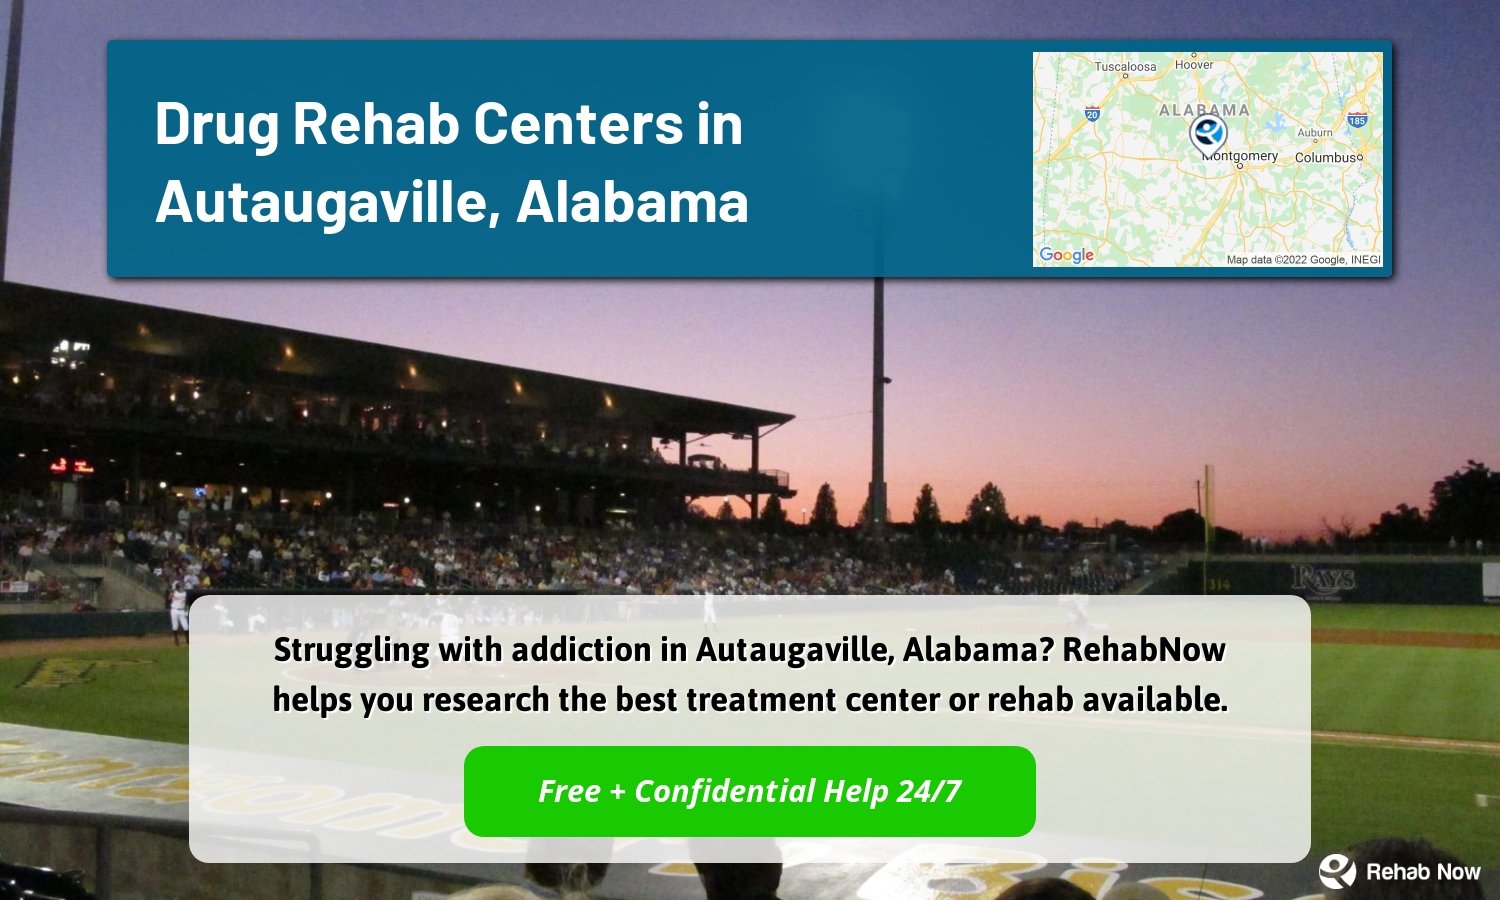 Struggling with addiction in Autaugaville, Alabama? RehabNow helps you research the best treatment center or rehab available.